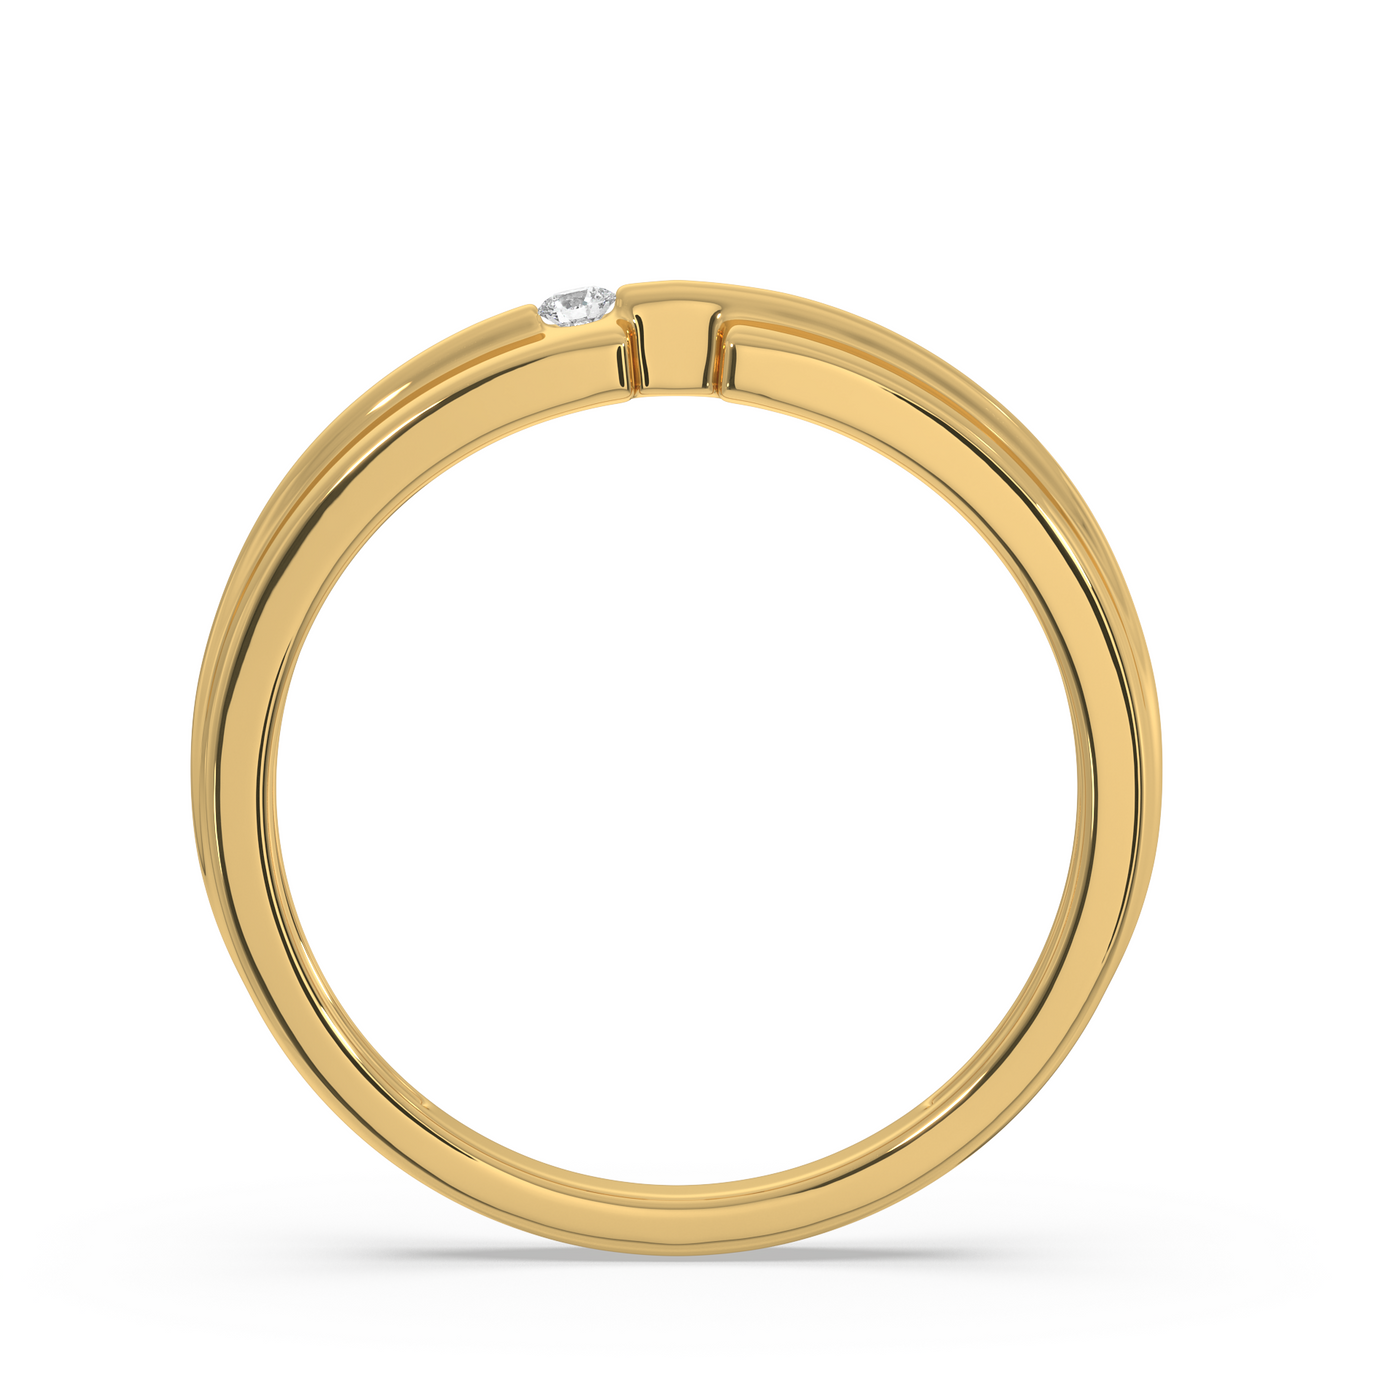 SY Women's Ring in Gold, Satin Finish Solitaire